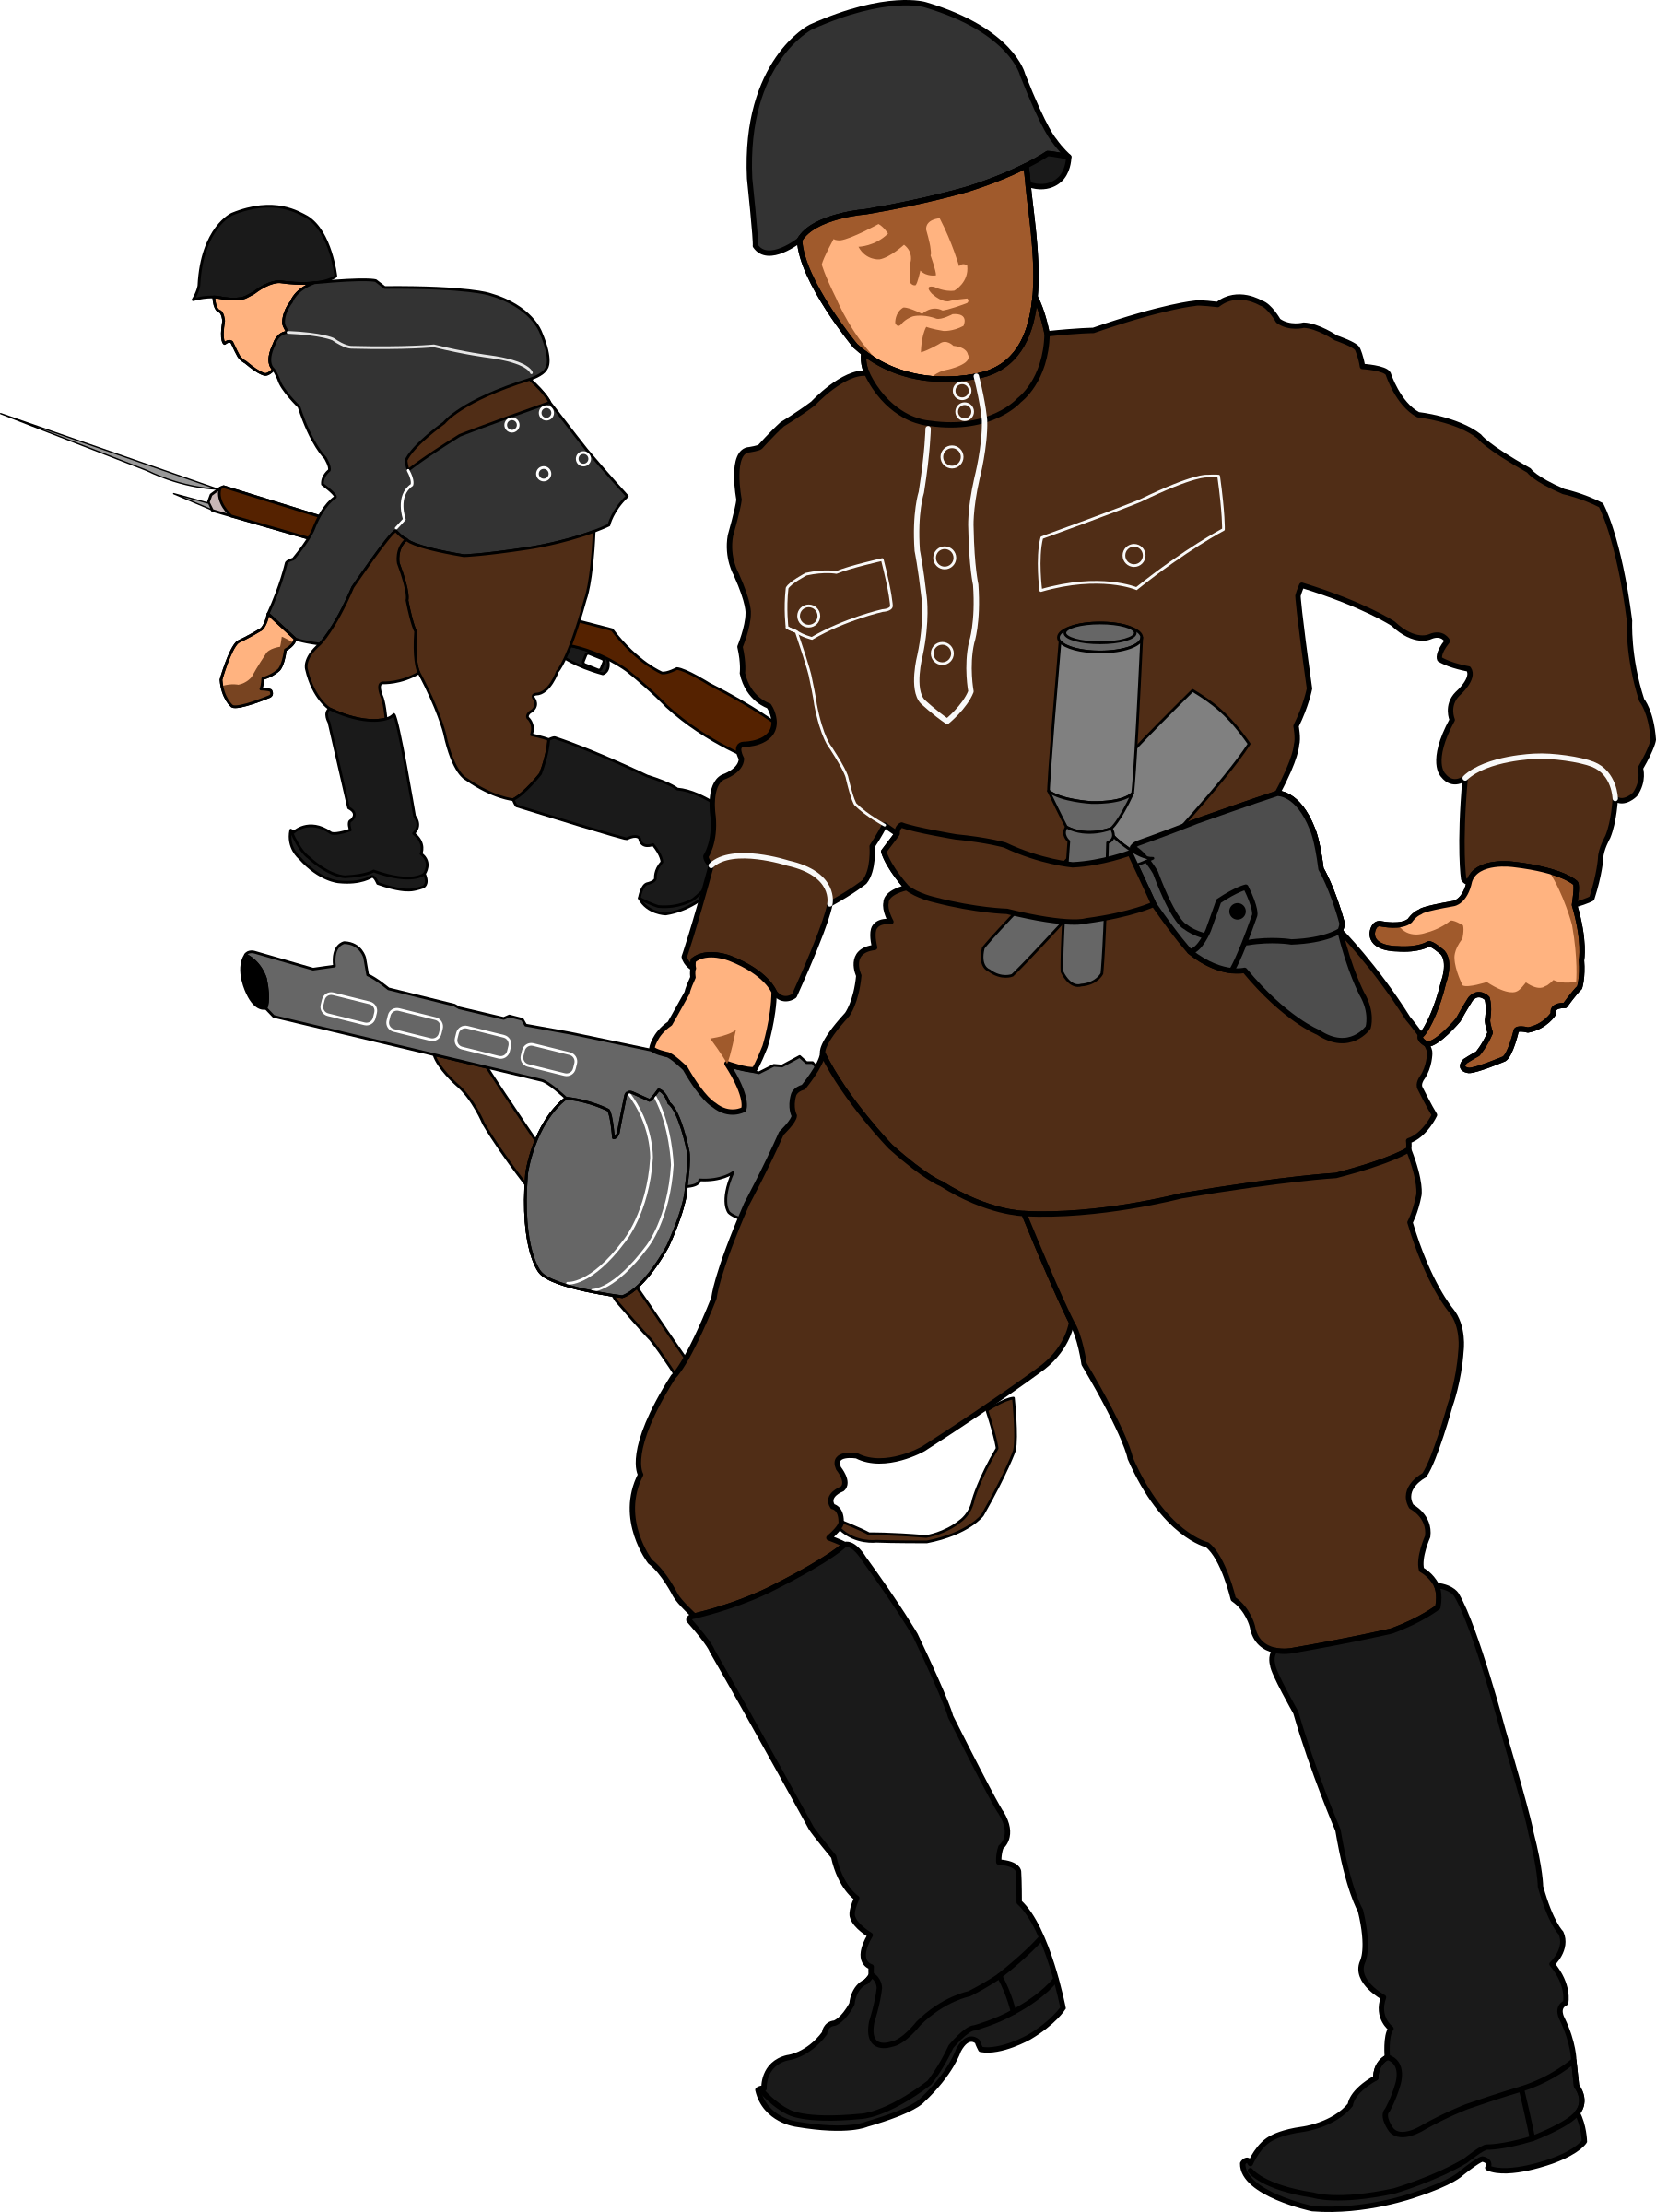 Soviet big image png. Soldiers clipart army soldier